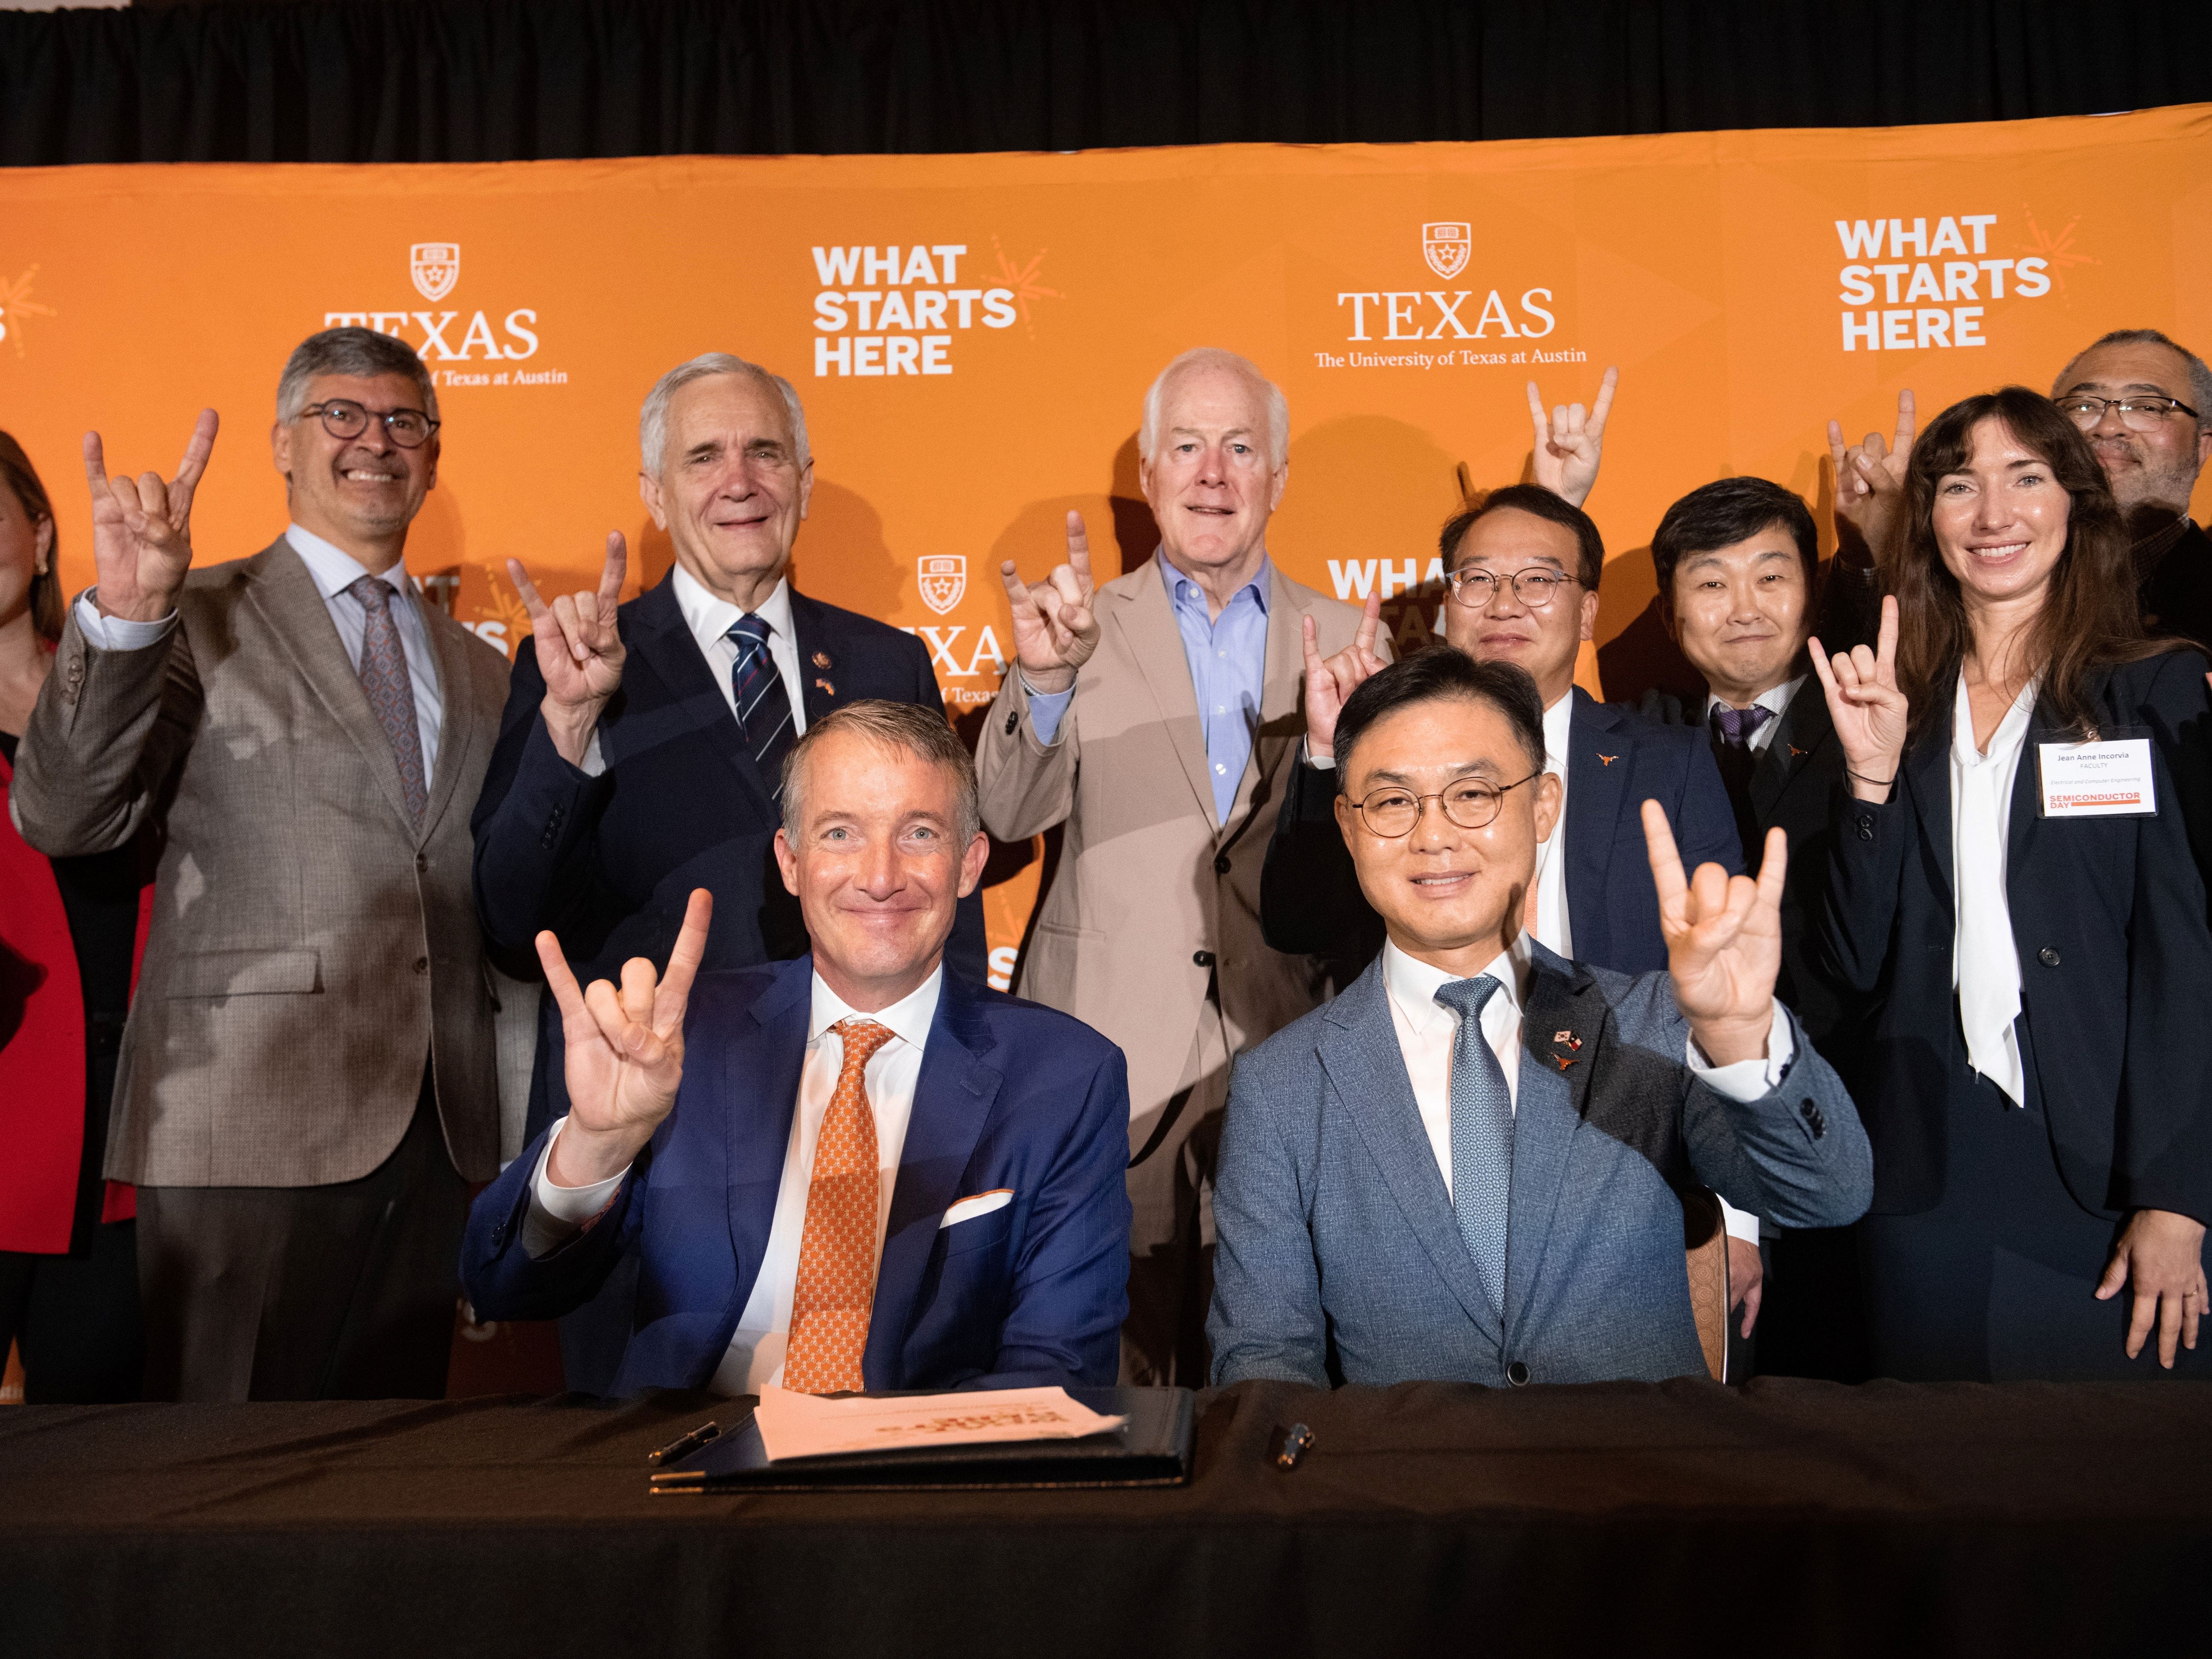 Jay Hartzell, Roger Bonnecaze and Semiconductor Day attendees doing hook 'em horns hand sign